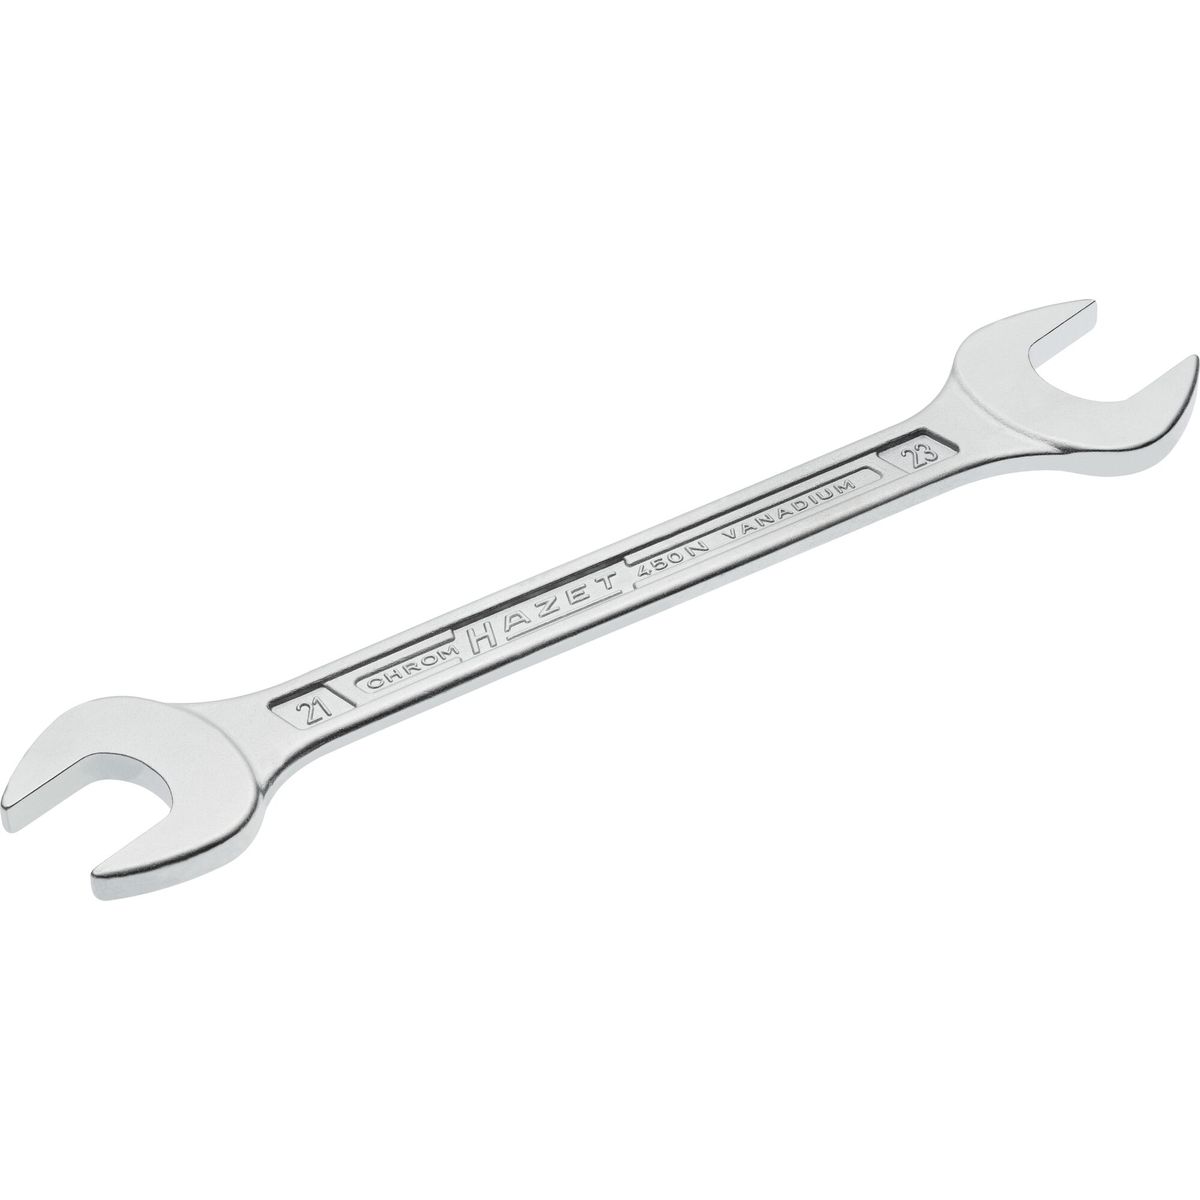 Double Open-End Wrench No.450N-21x23 Hazet®